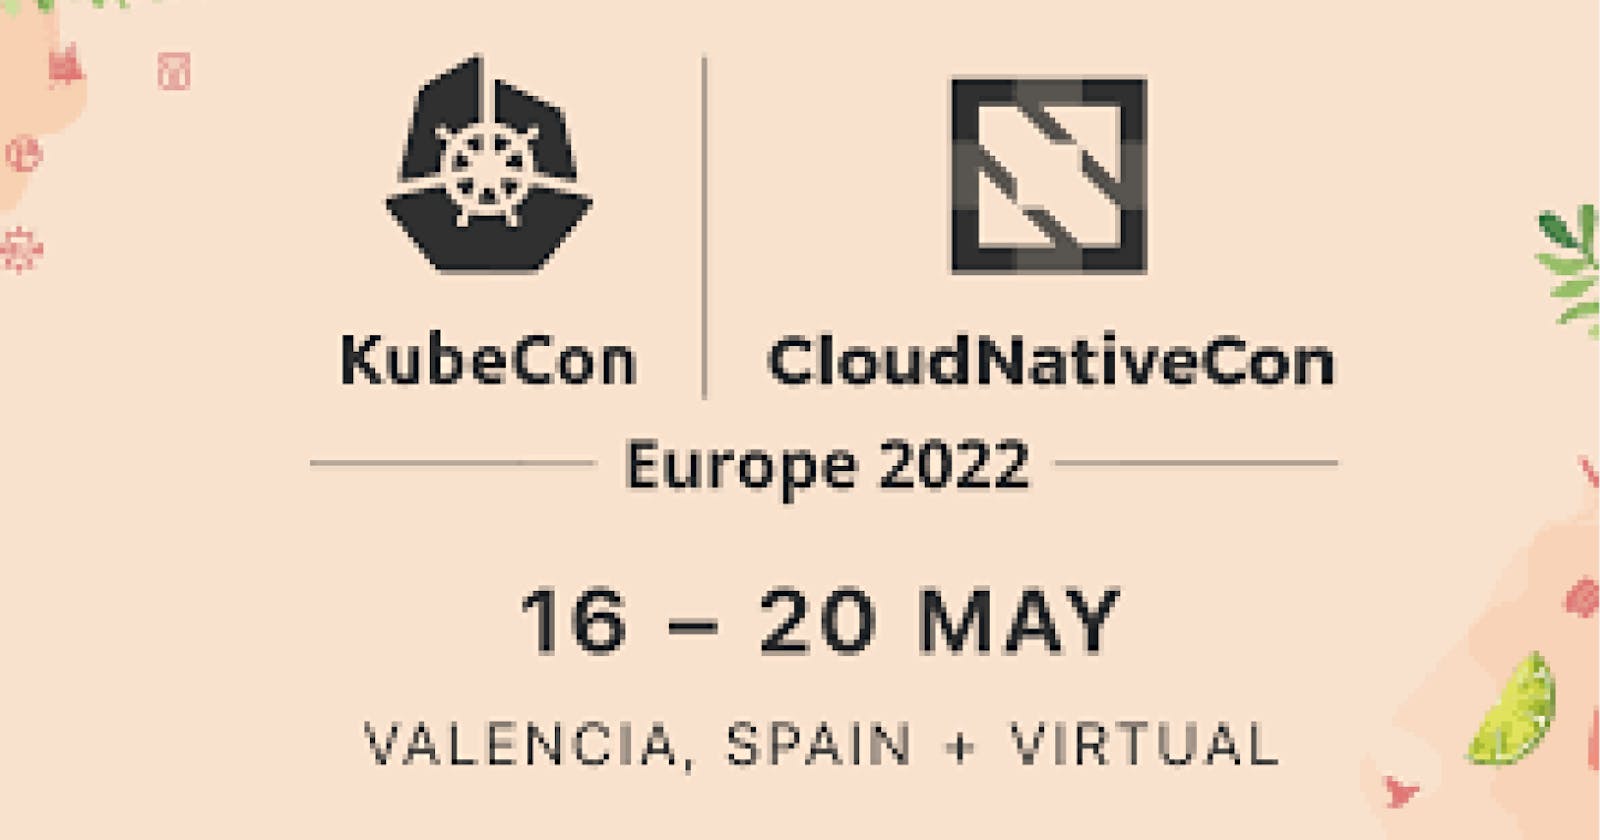 My Experience of missing out on Kubecon — CloudNativeCon 2022 Europe